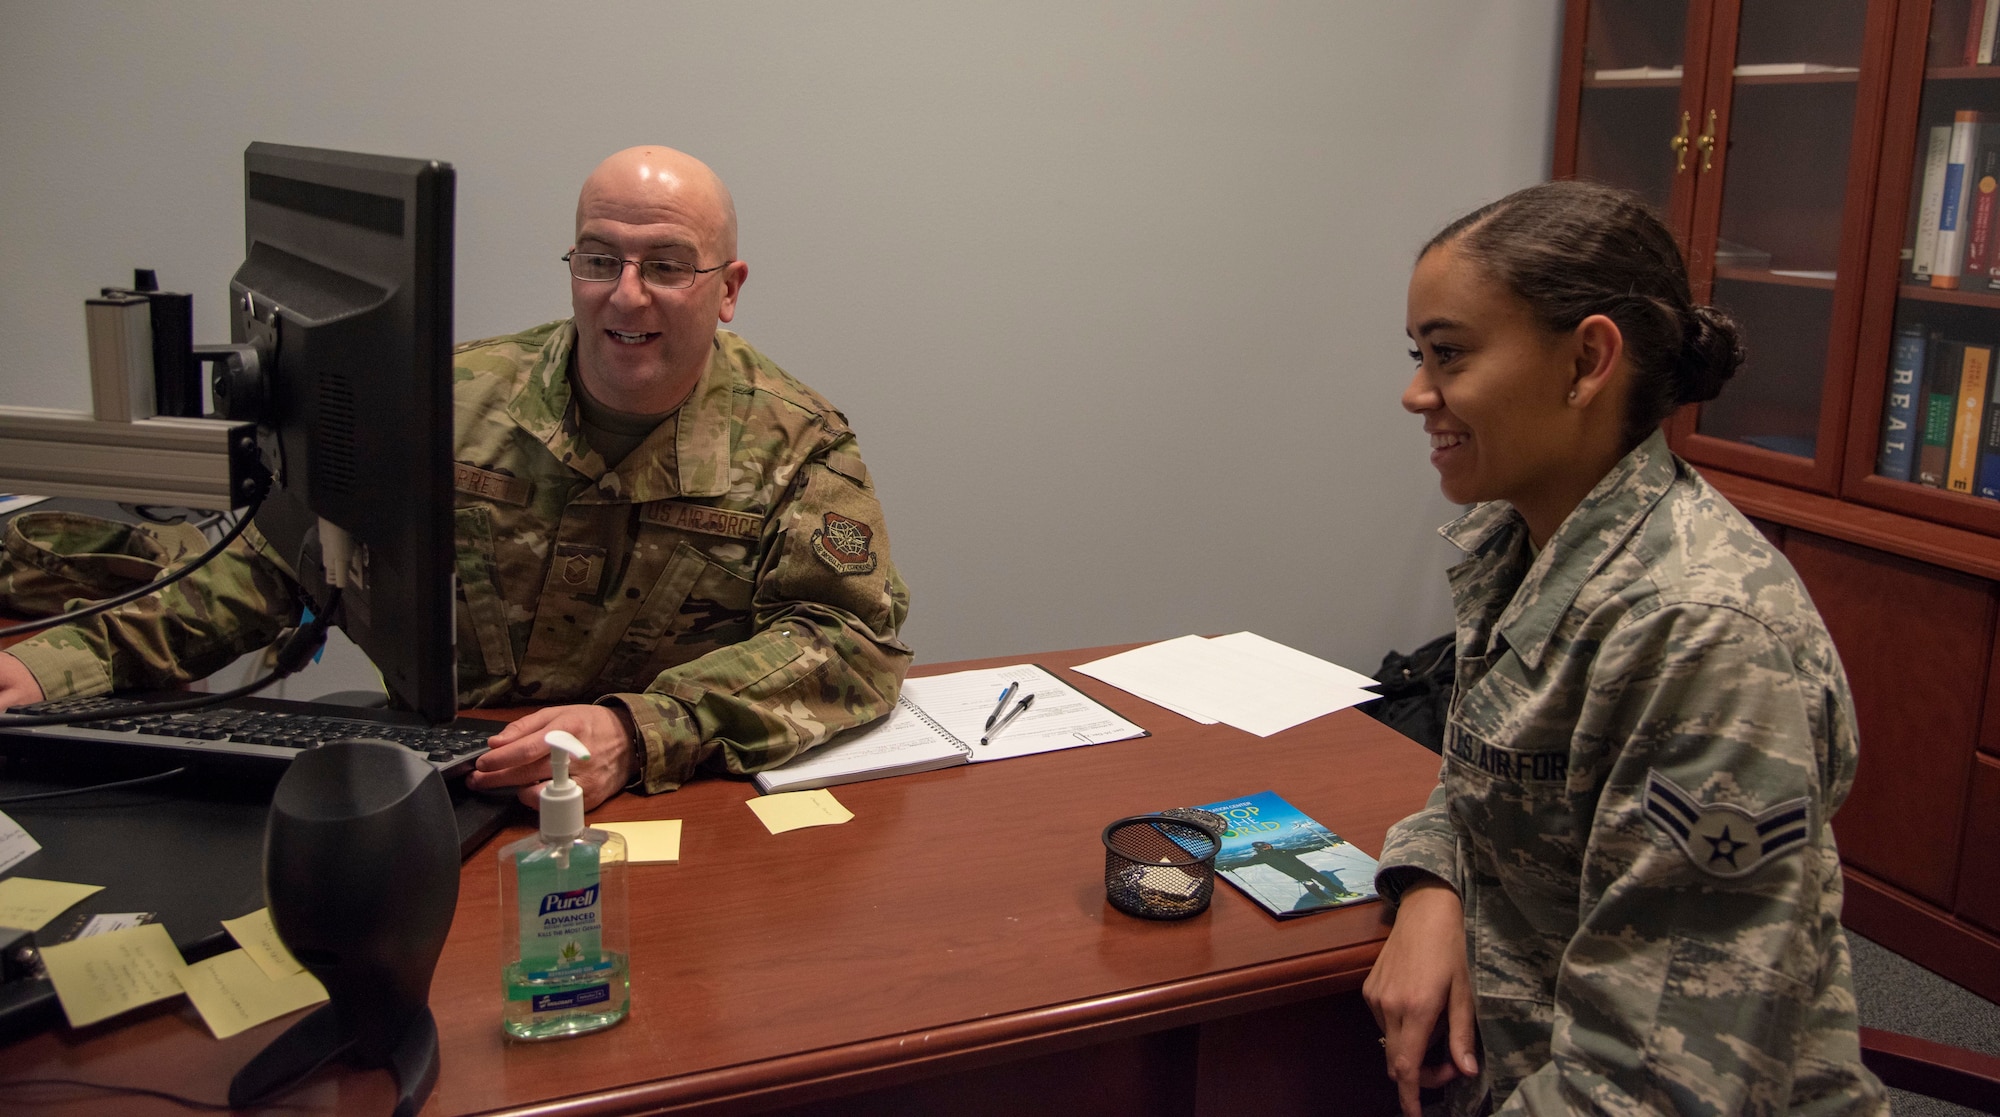 U.S. Air Force Master Sgt. Benjamin Barrett, 92nd Force Support Squadron career assistance advisor, gives Airman 1st Class Kiaundra Miller, 92nd Air Refueling Wing Public Affairs photojournalist, career advice at Fairchild Air Force Base, Washington, Dec. 18, 2019. Team Fairchild’s career assistance advisor provides resources and a better look at options when Airmen arrive at a crossroads in their career. (U.S. Air Force photo by Airman Anneliese Kaiser)